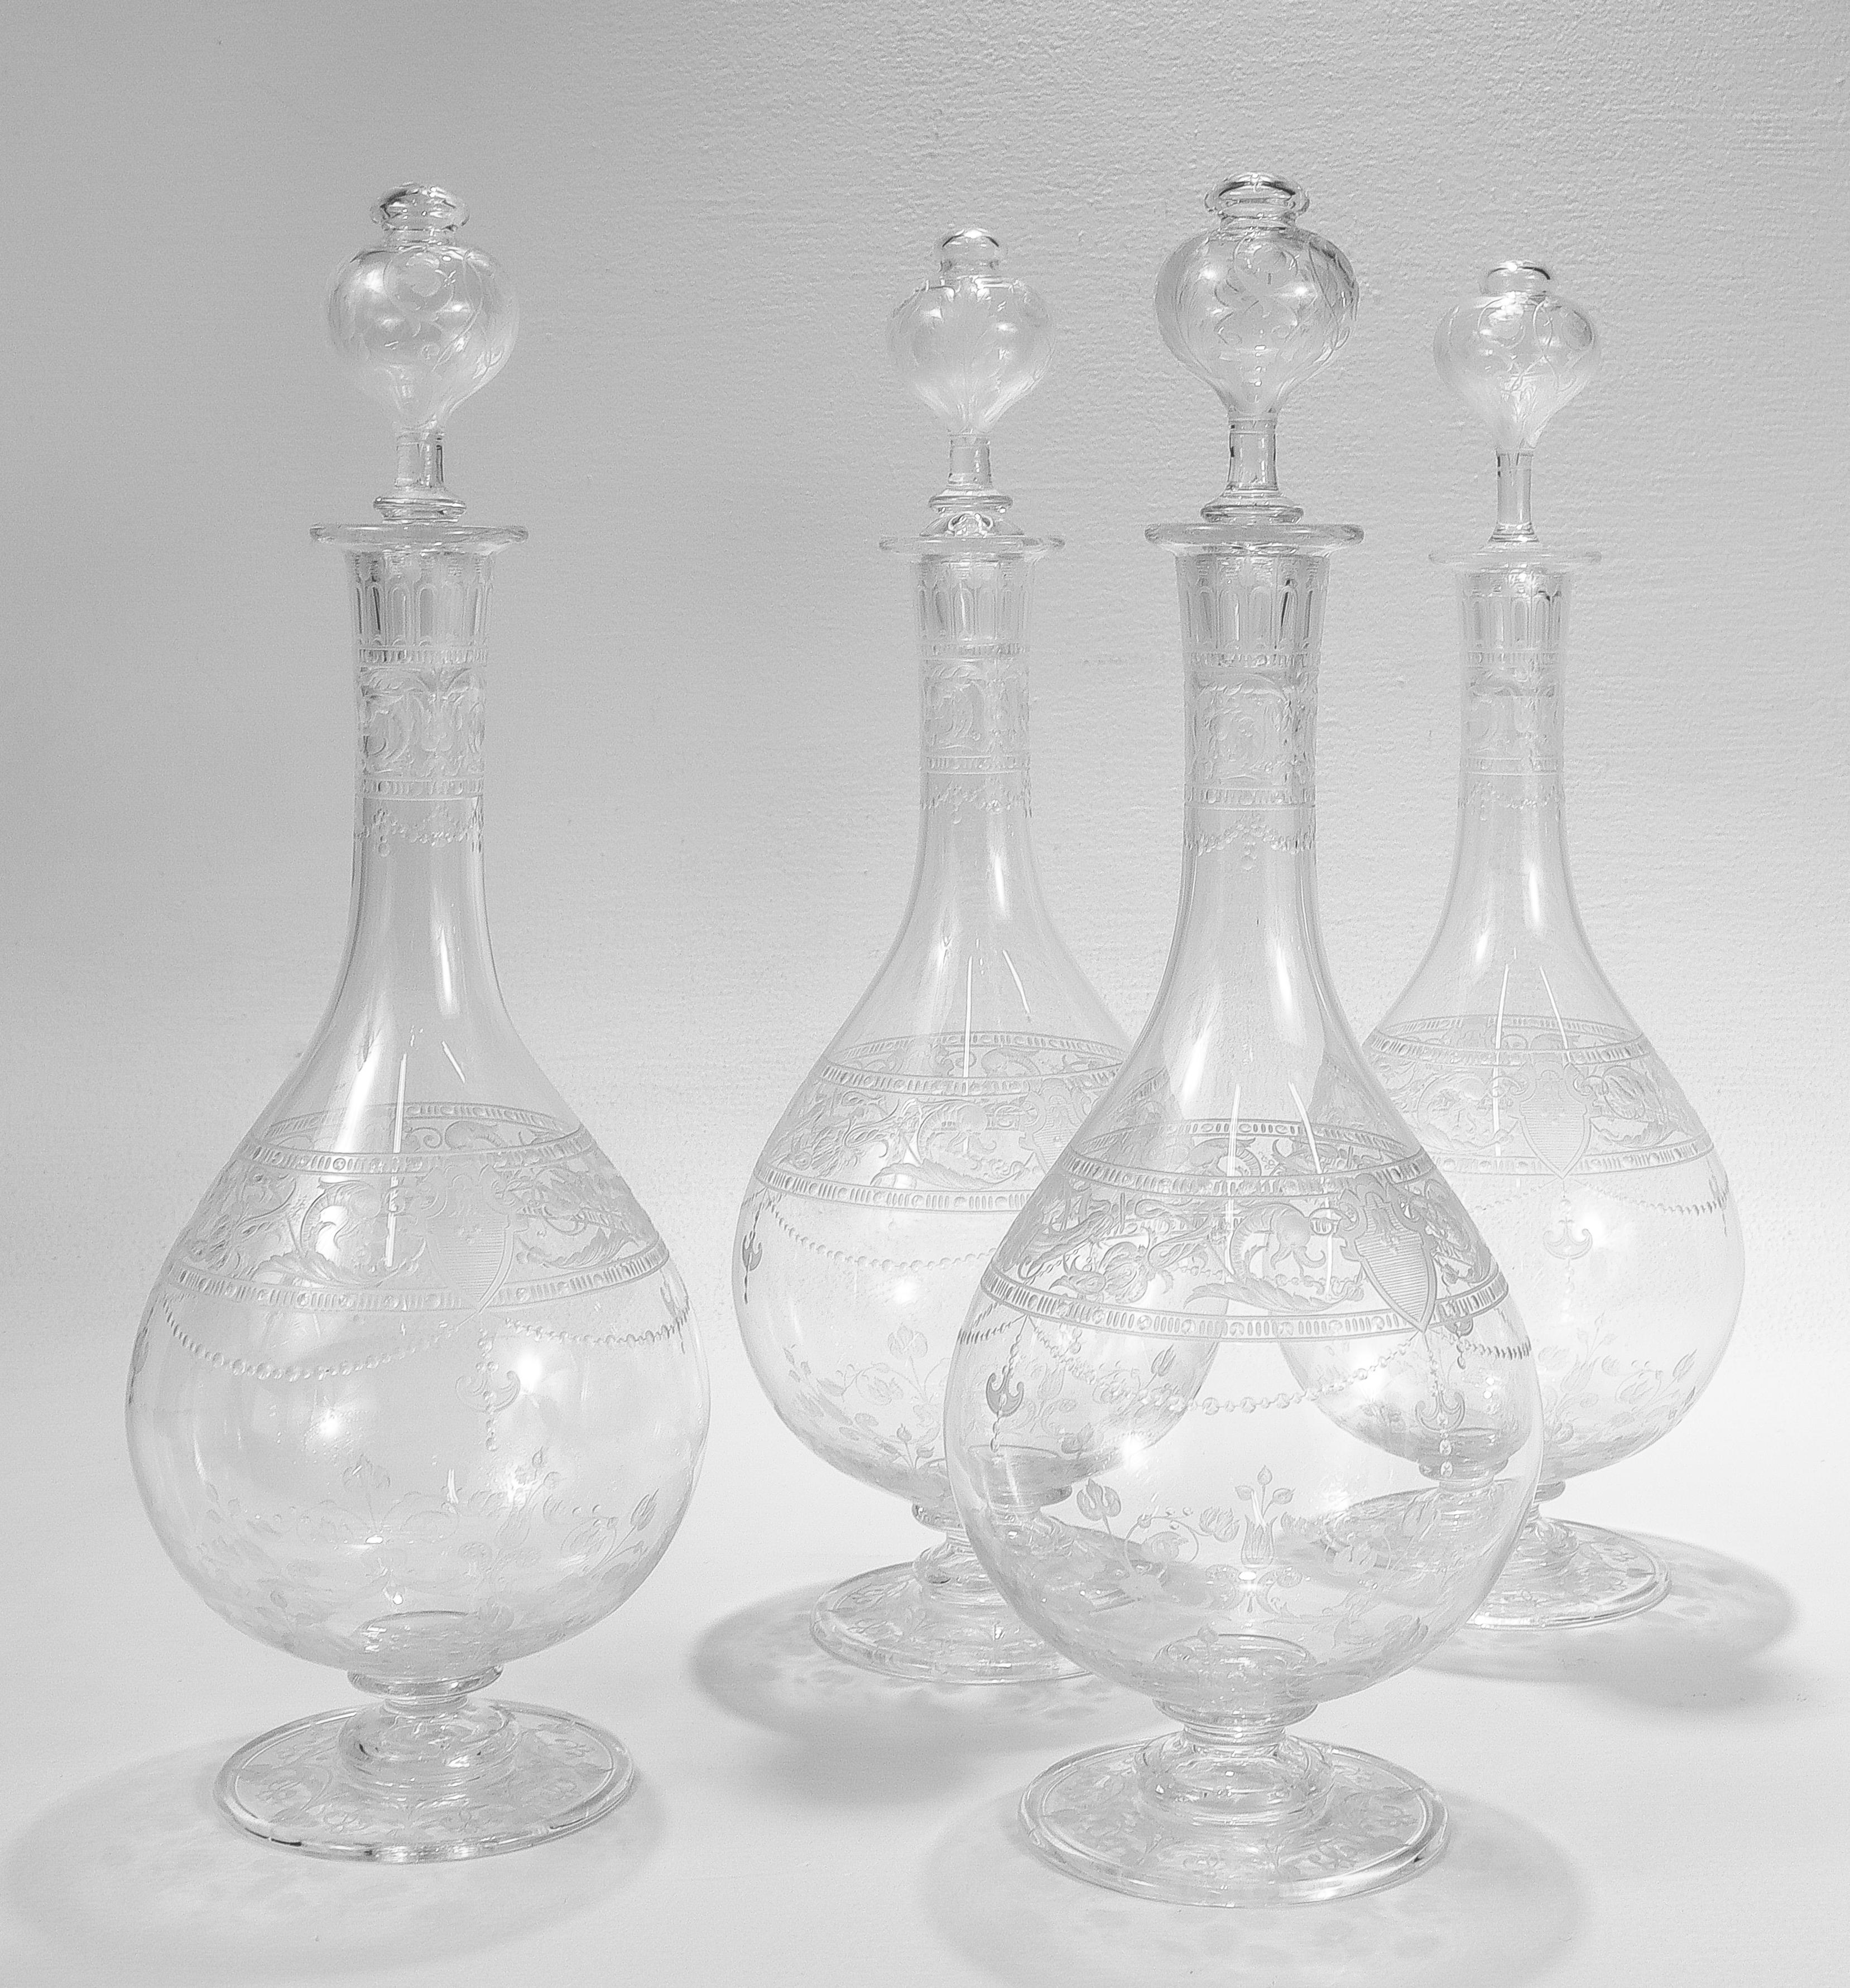 A fine pair of antique English etched and engraved glass decanters.

Attributed to Stevens & Williams or Webb.

With engraved & etched designs trelliswork, flowers, and shield devices.

Each with a stopper with cut leaf motifs. 

The